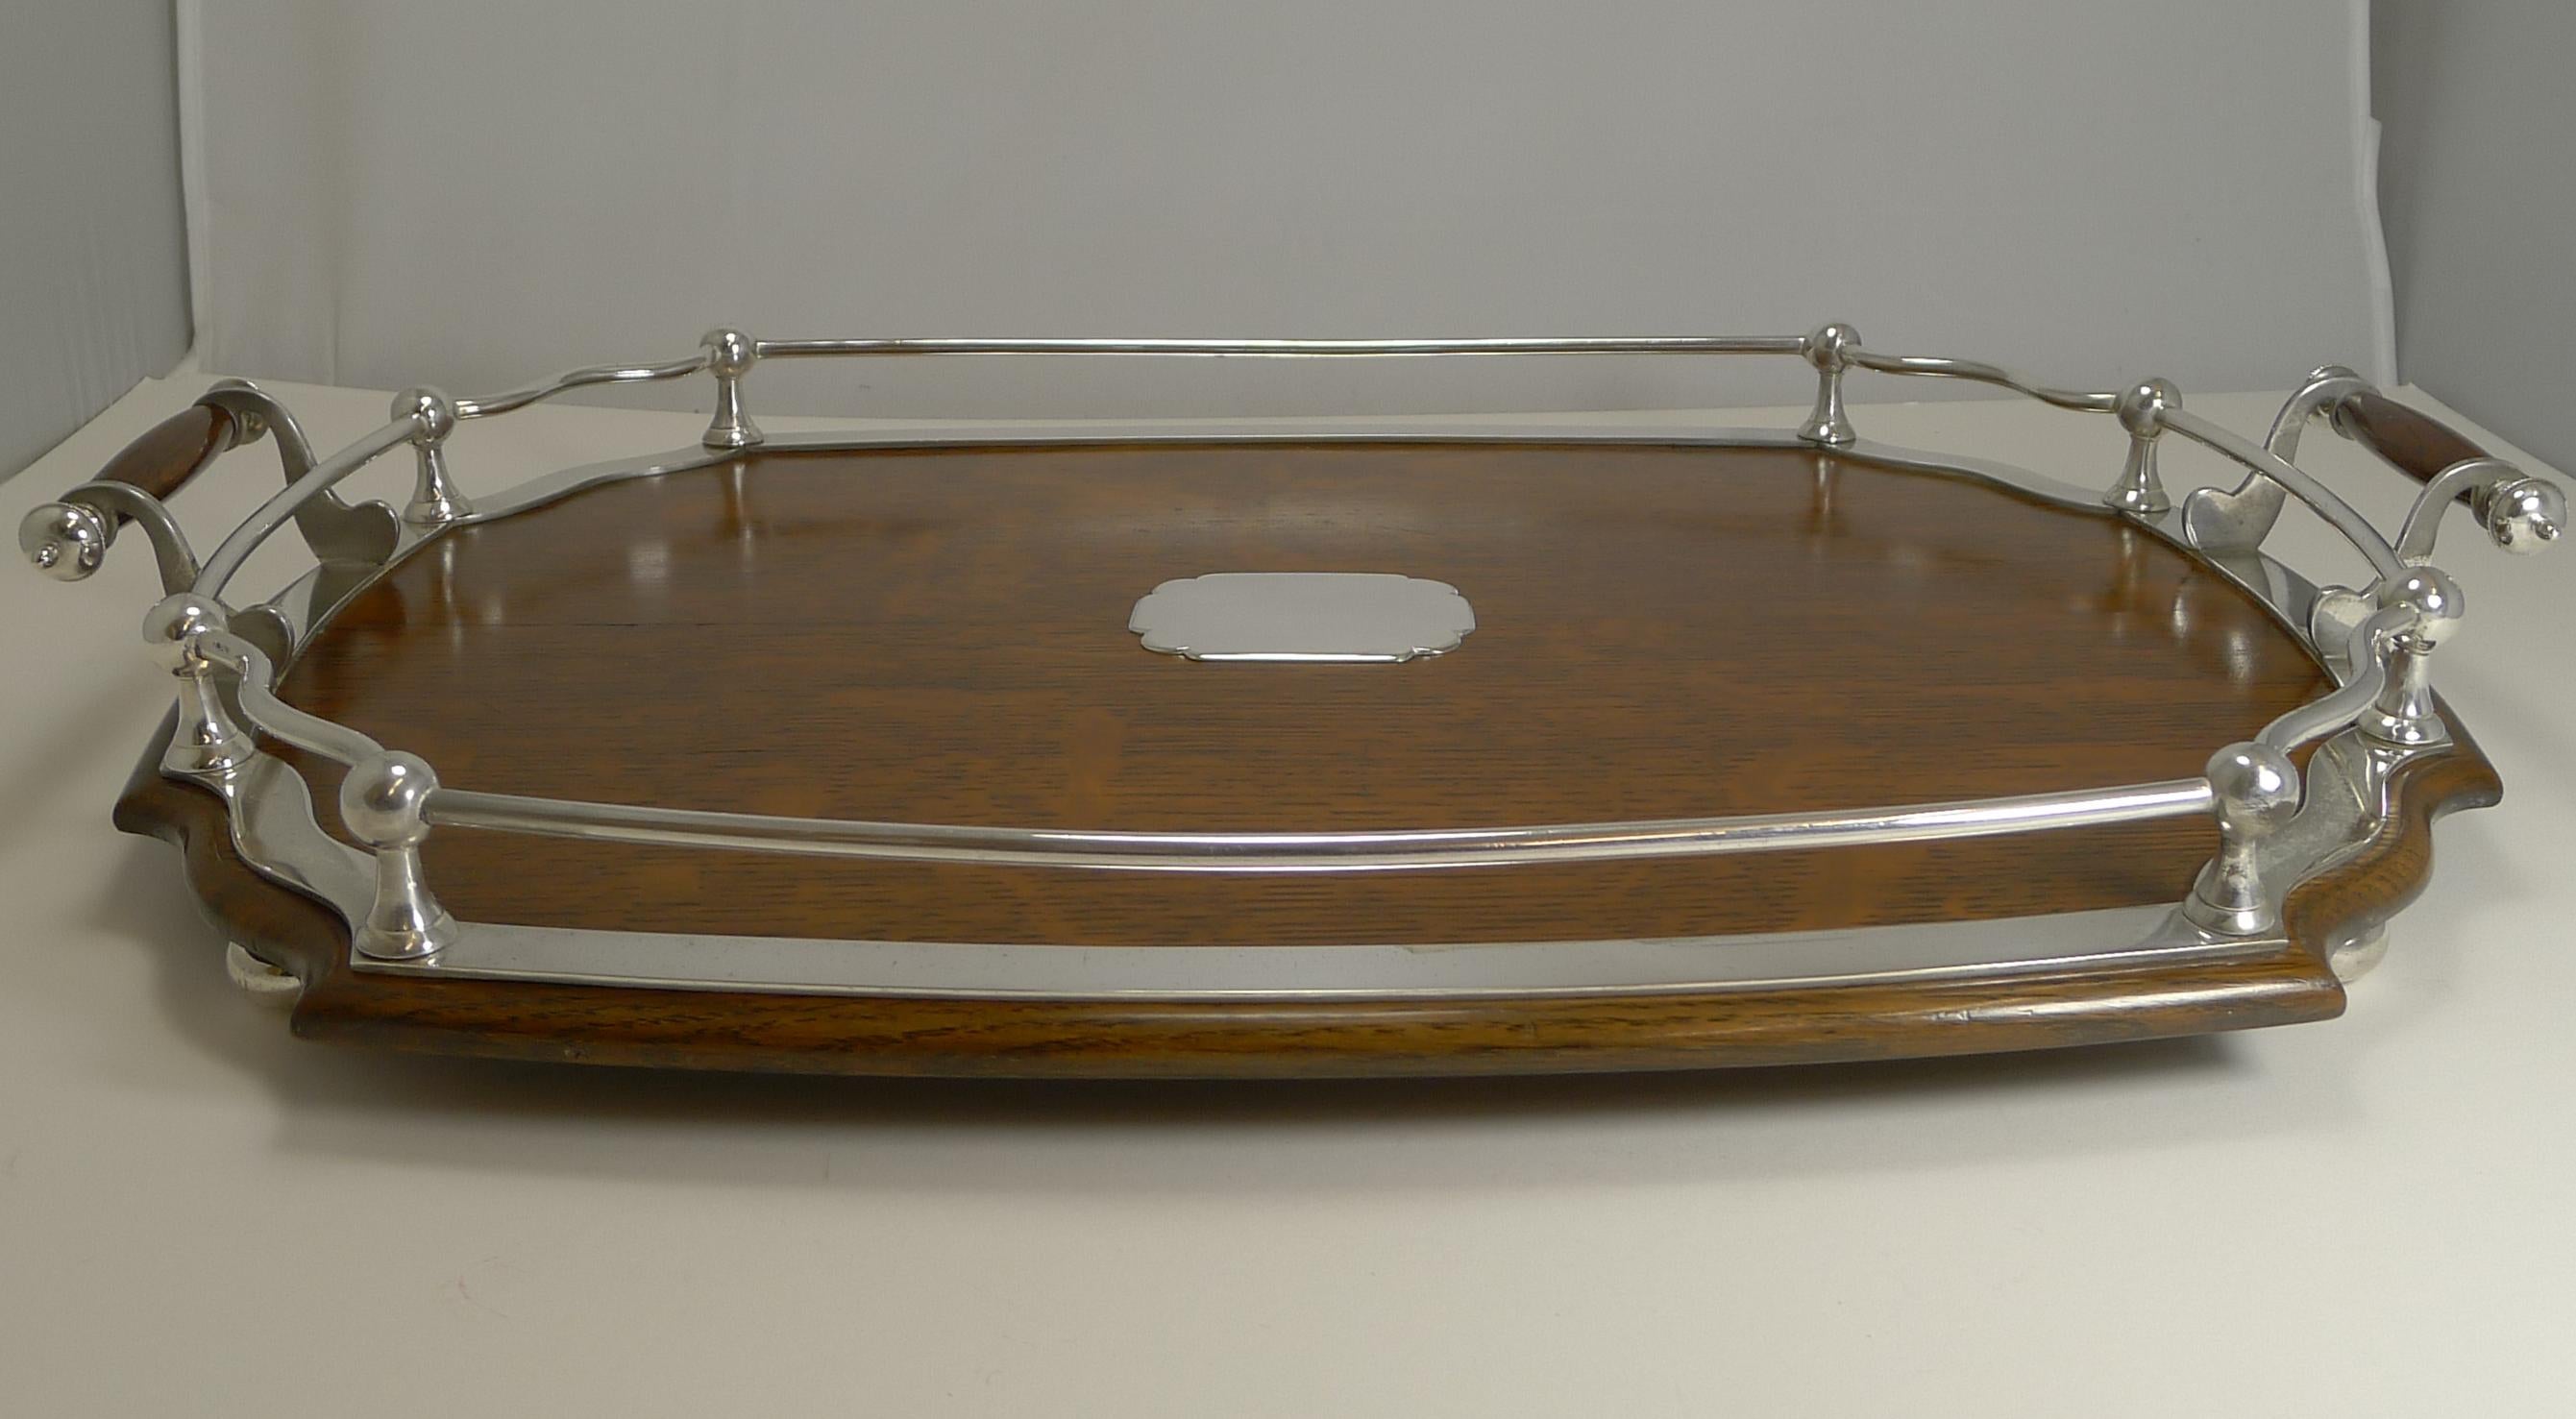 A most handsome late Victorian / early Edwardian cocktail / serving tray, creates a great look for your drinks display paired together with other complimentary pieces (these are not included).

Made from a solid English oak and standing on four